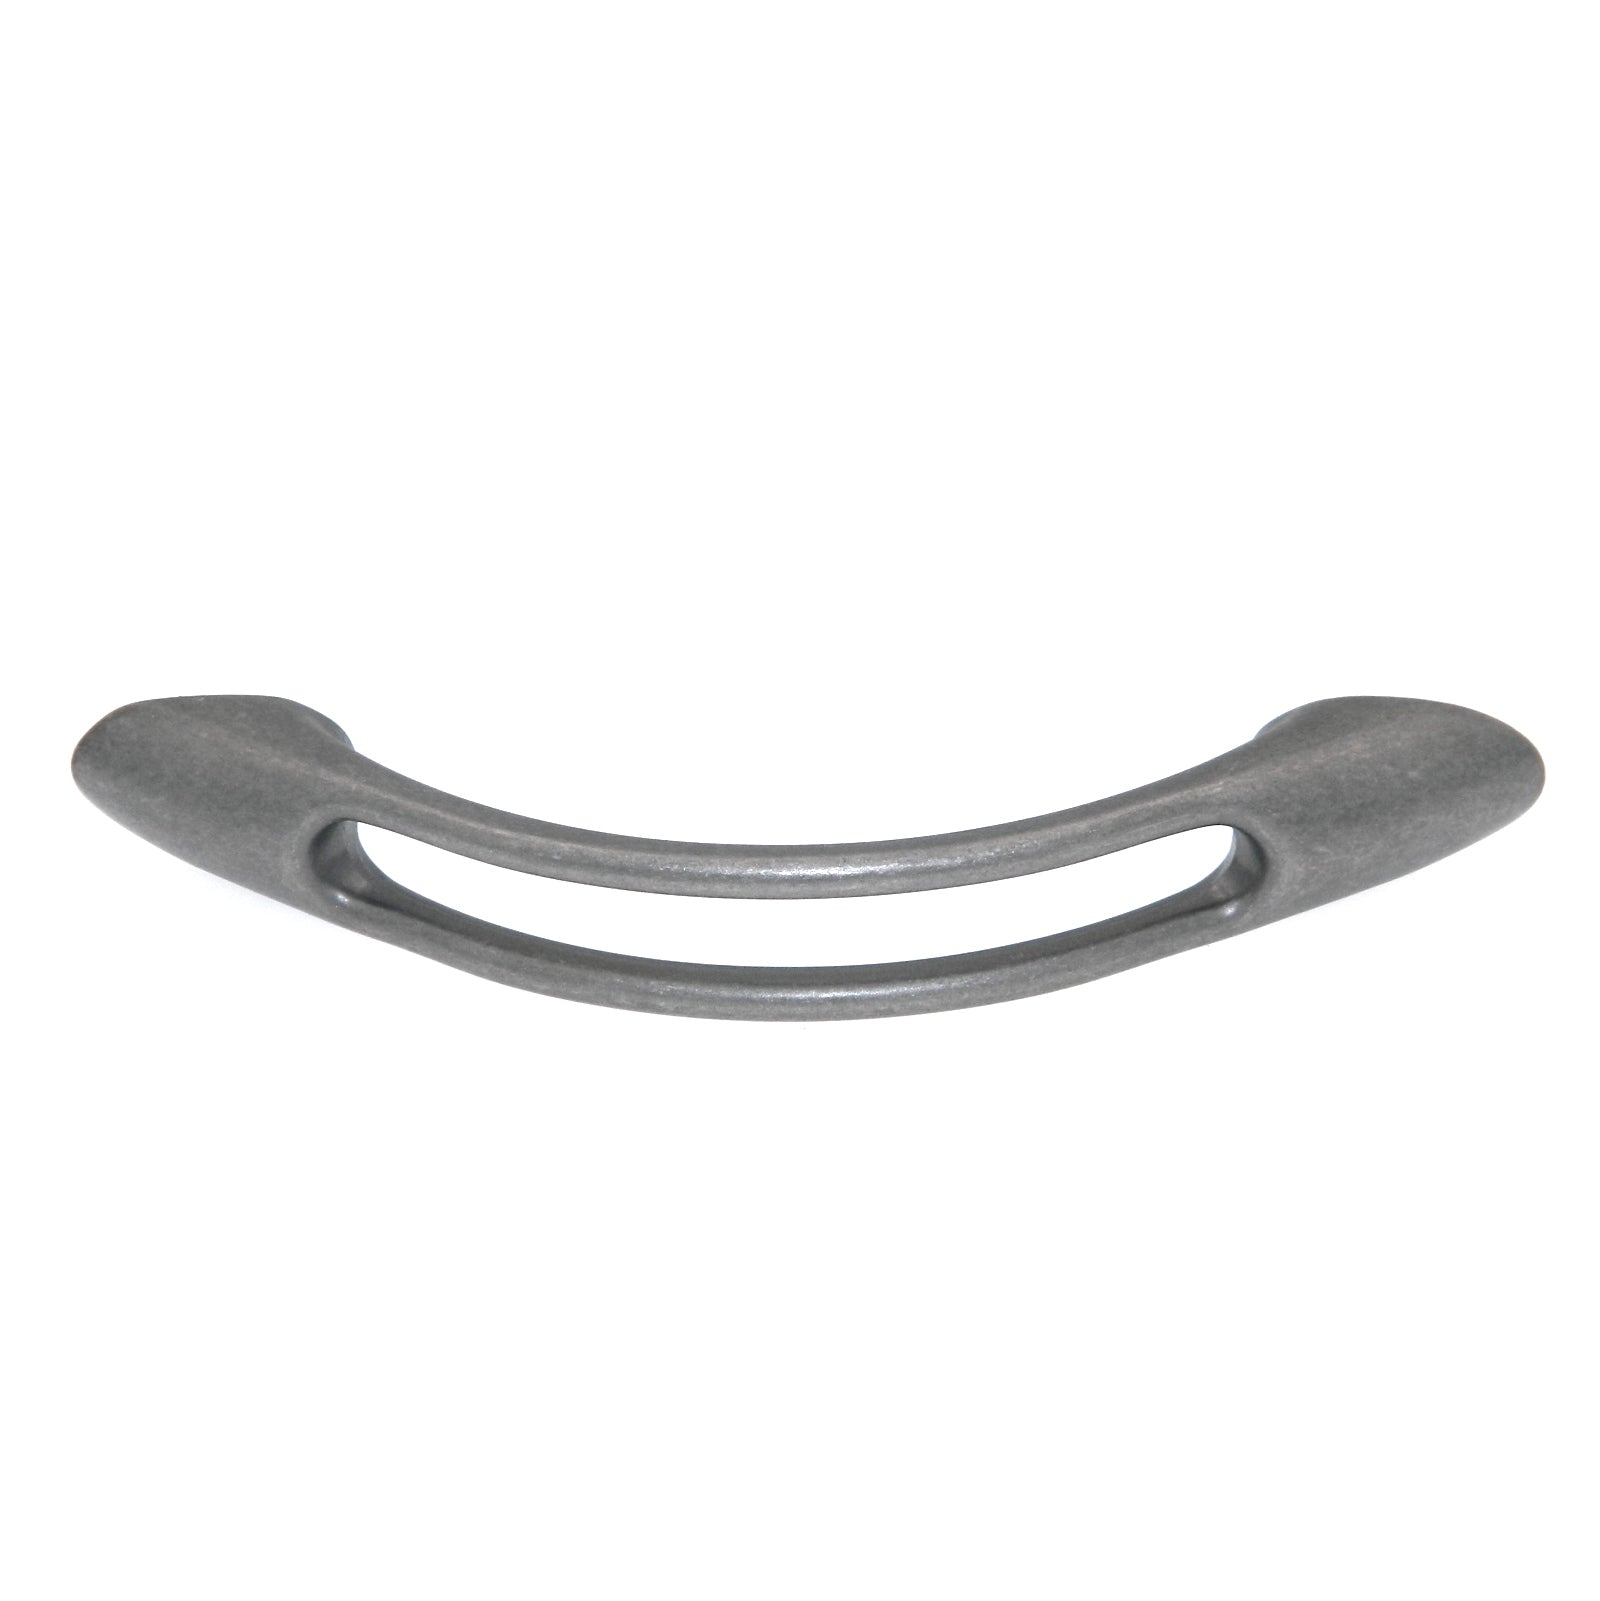 Amerock Essential'Z Weathered Nickel 3" Center to Center Cabinet Handle Pull BP19259-WN